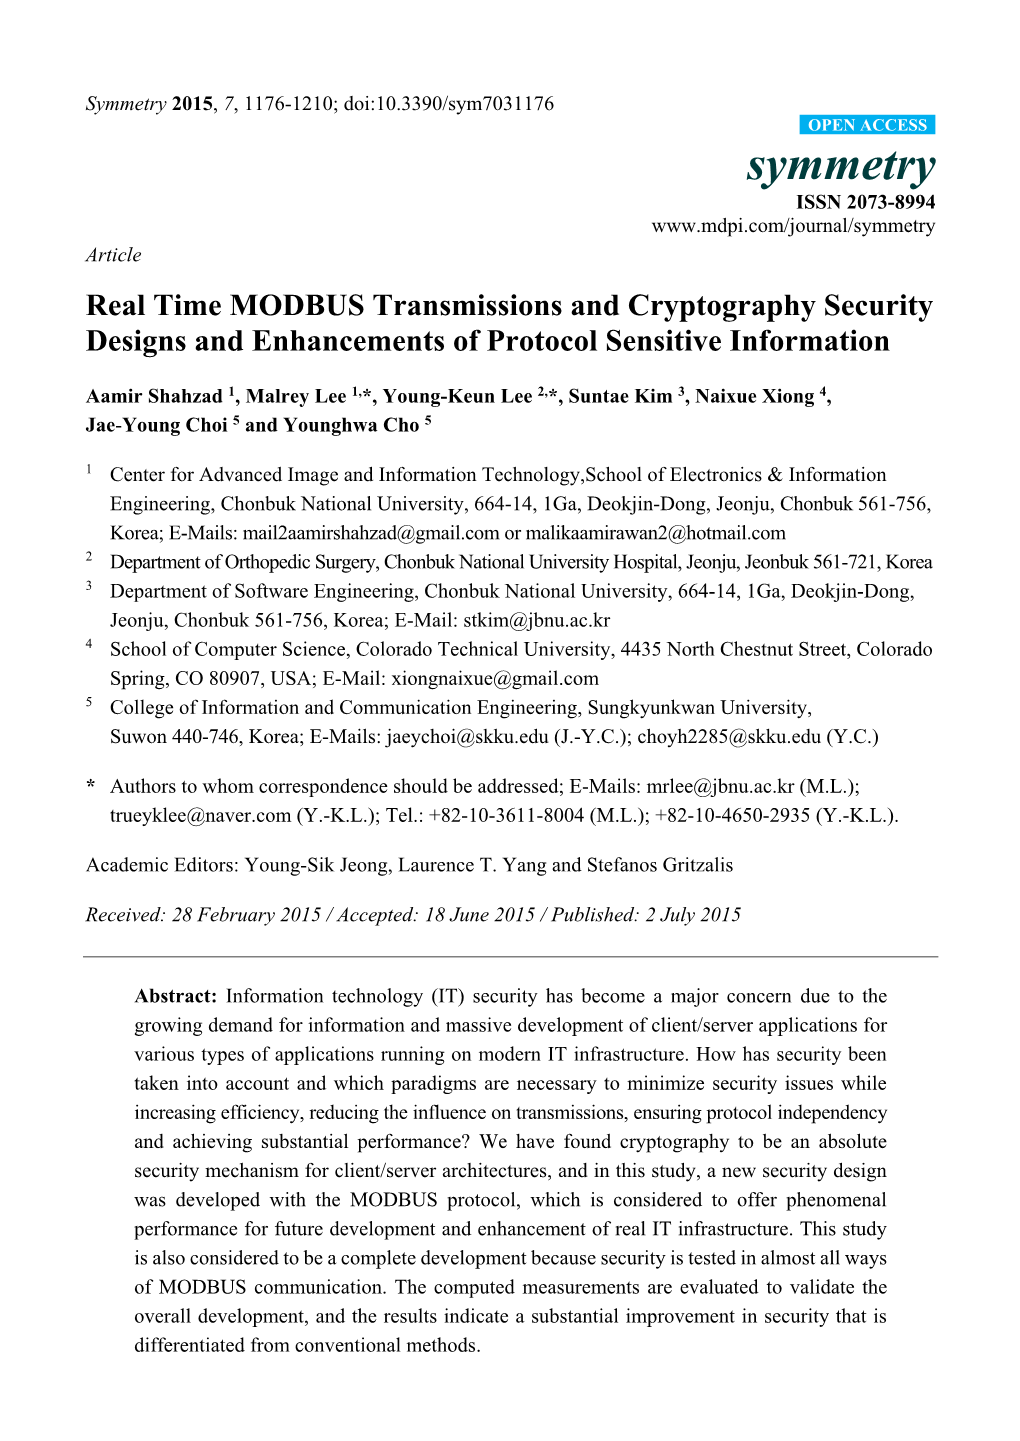 Real Time MODBUS Transmissions and Cryptography Security Designs and Enhancements of Protocol Sensitive Information